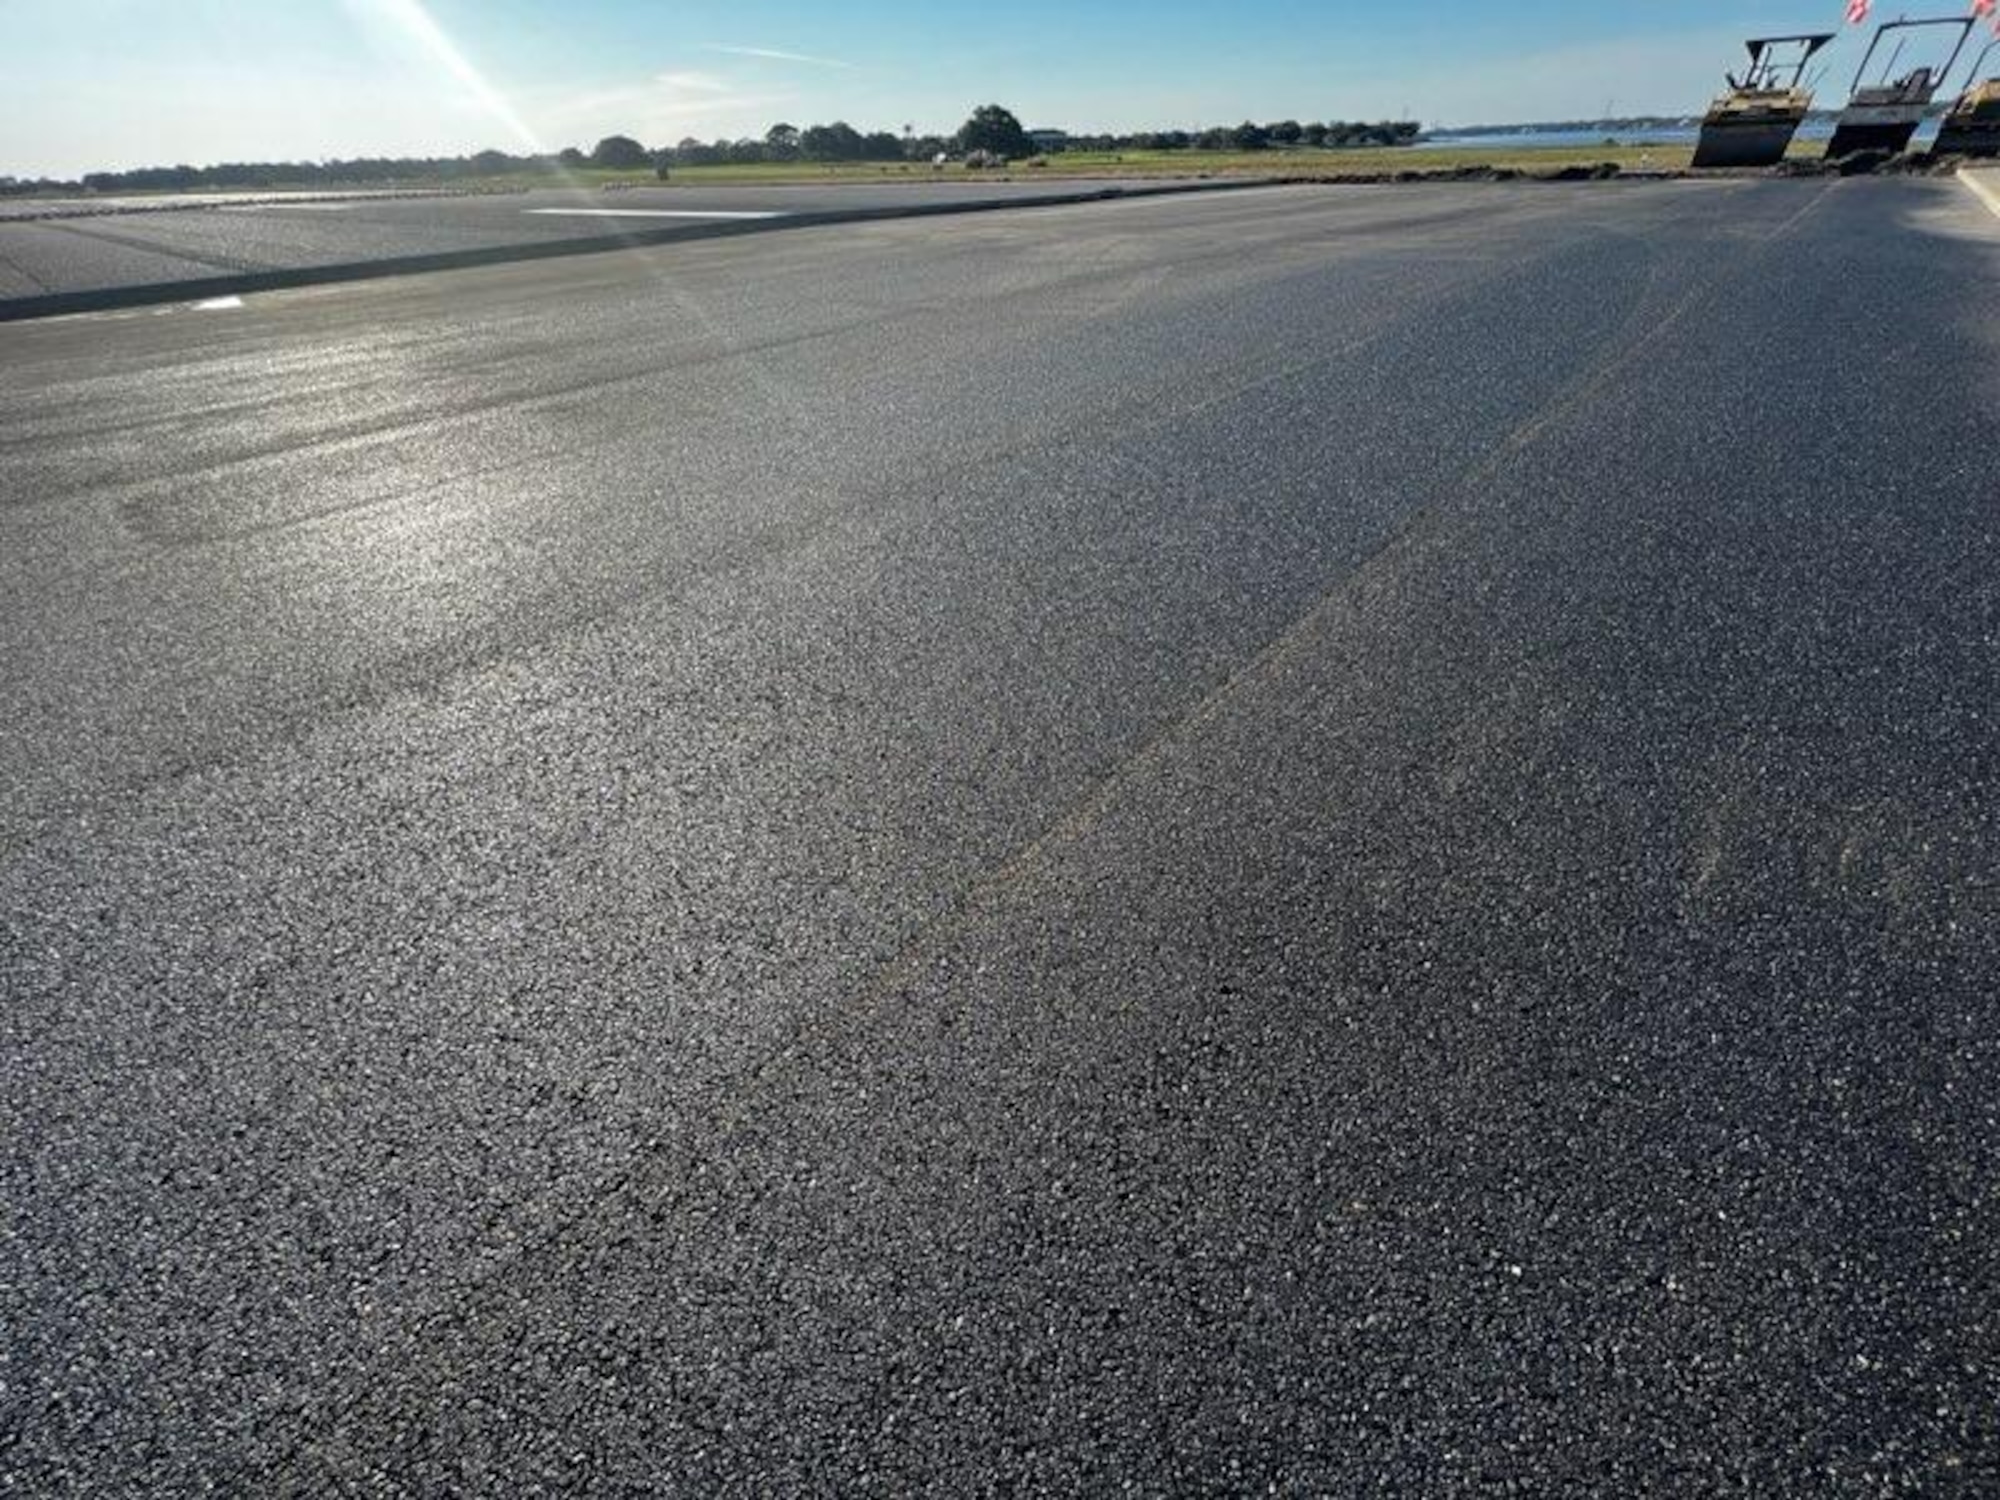 Repairs to a depression and drains under the flightline were completed in March, opening the flightline back for normal operations.